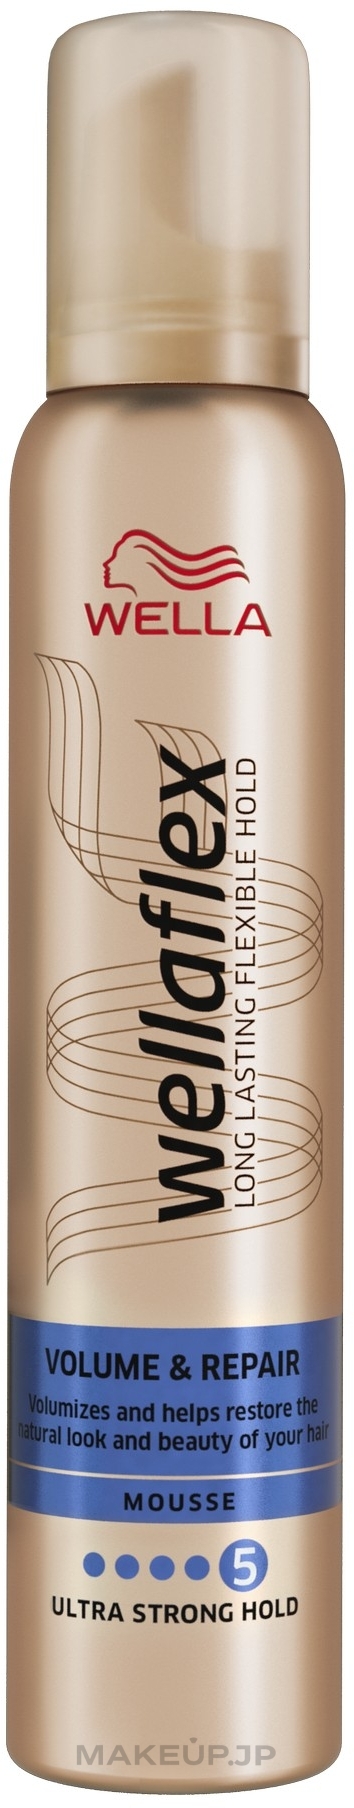 Ultra-Strong Hold Hair Styling Mousse "Volume and Repair" - Wella Wellaflex Volume & Repair  — photo 200 ml